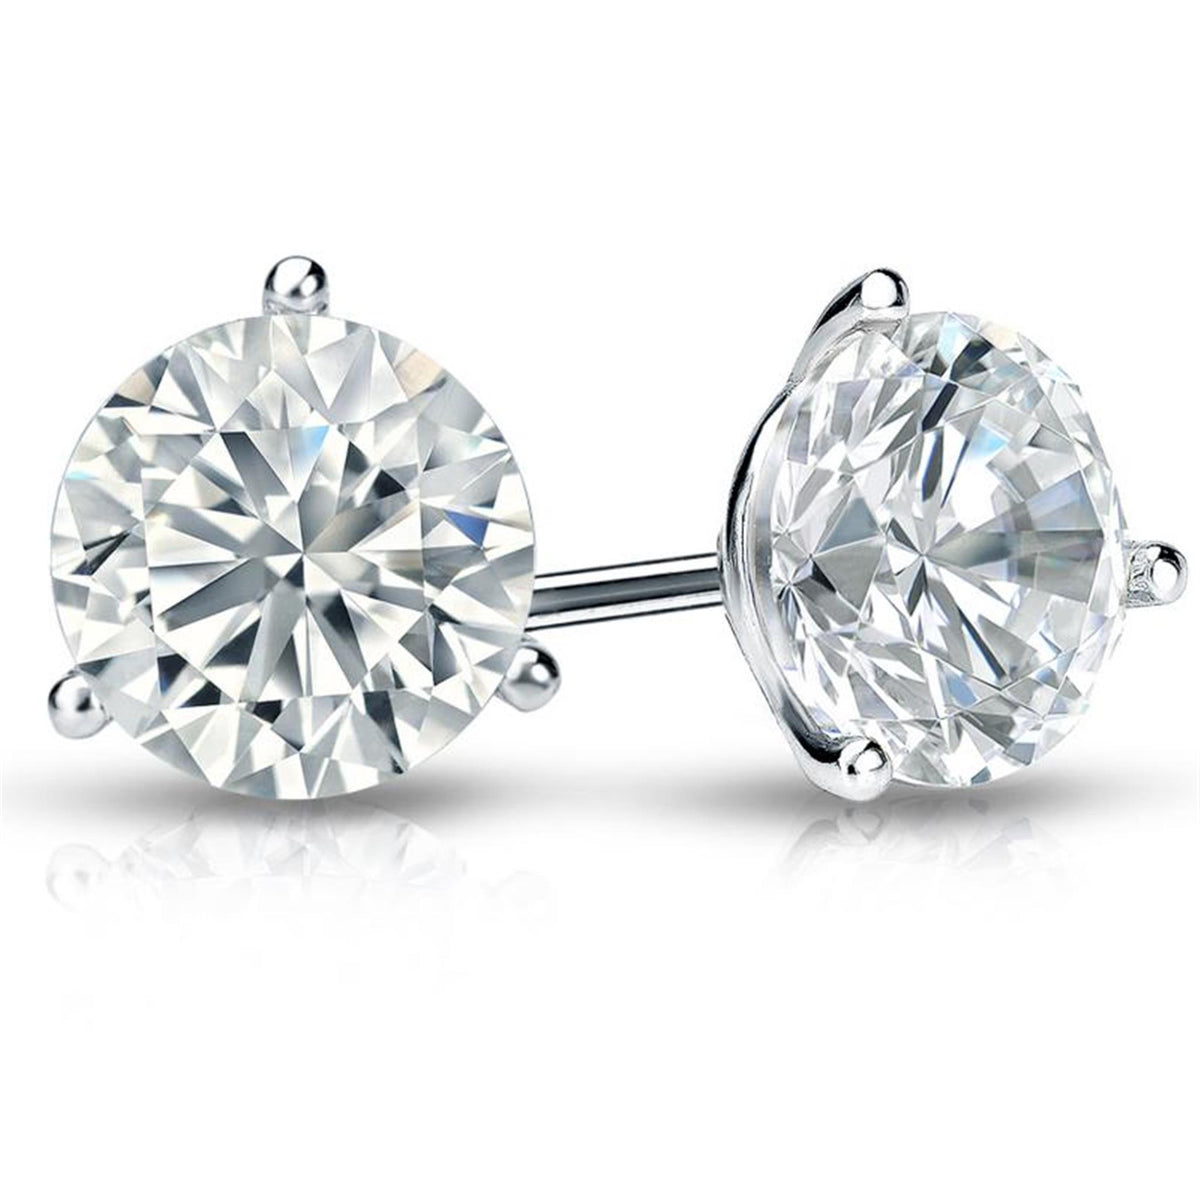 14Kt White Gold Classic Stud Earrings With 2.90cttw Natural Diamonds